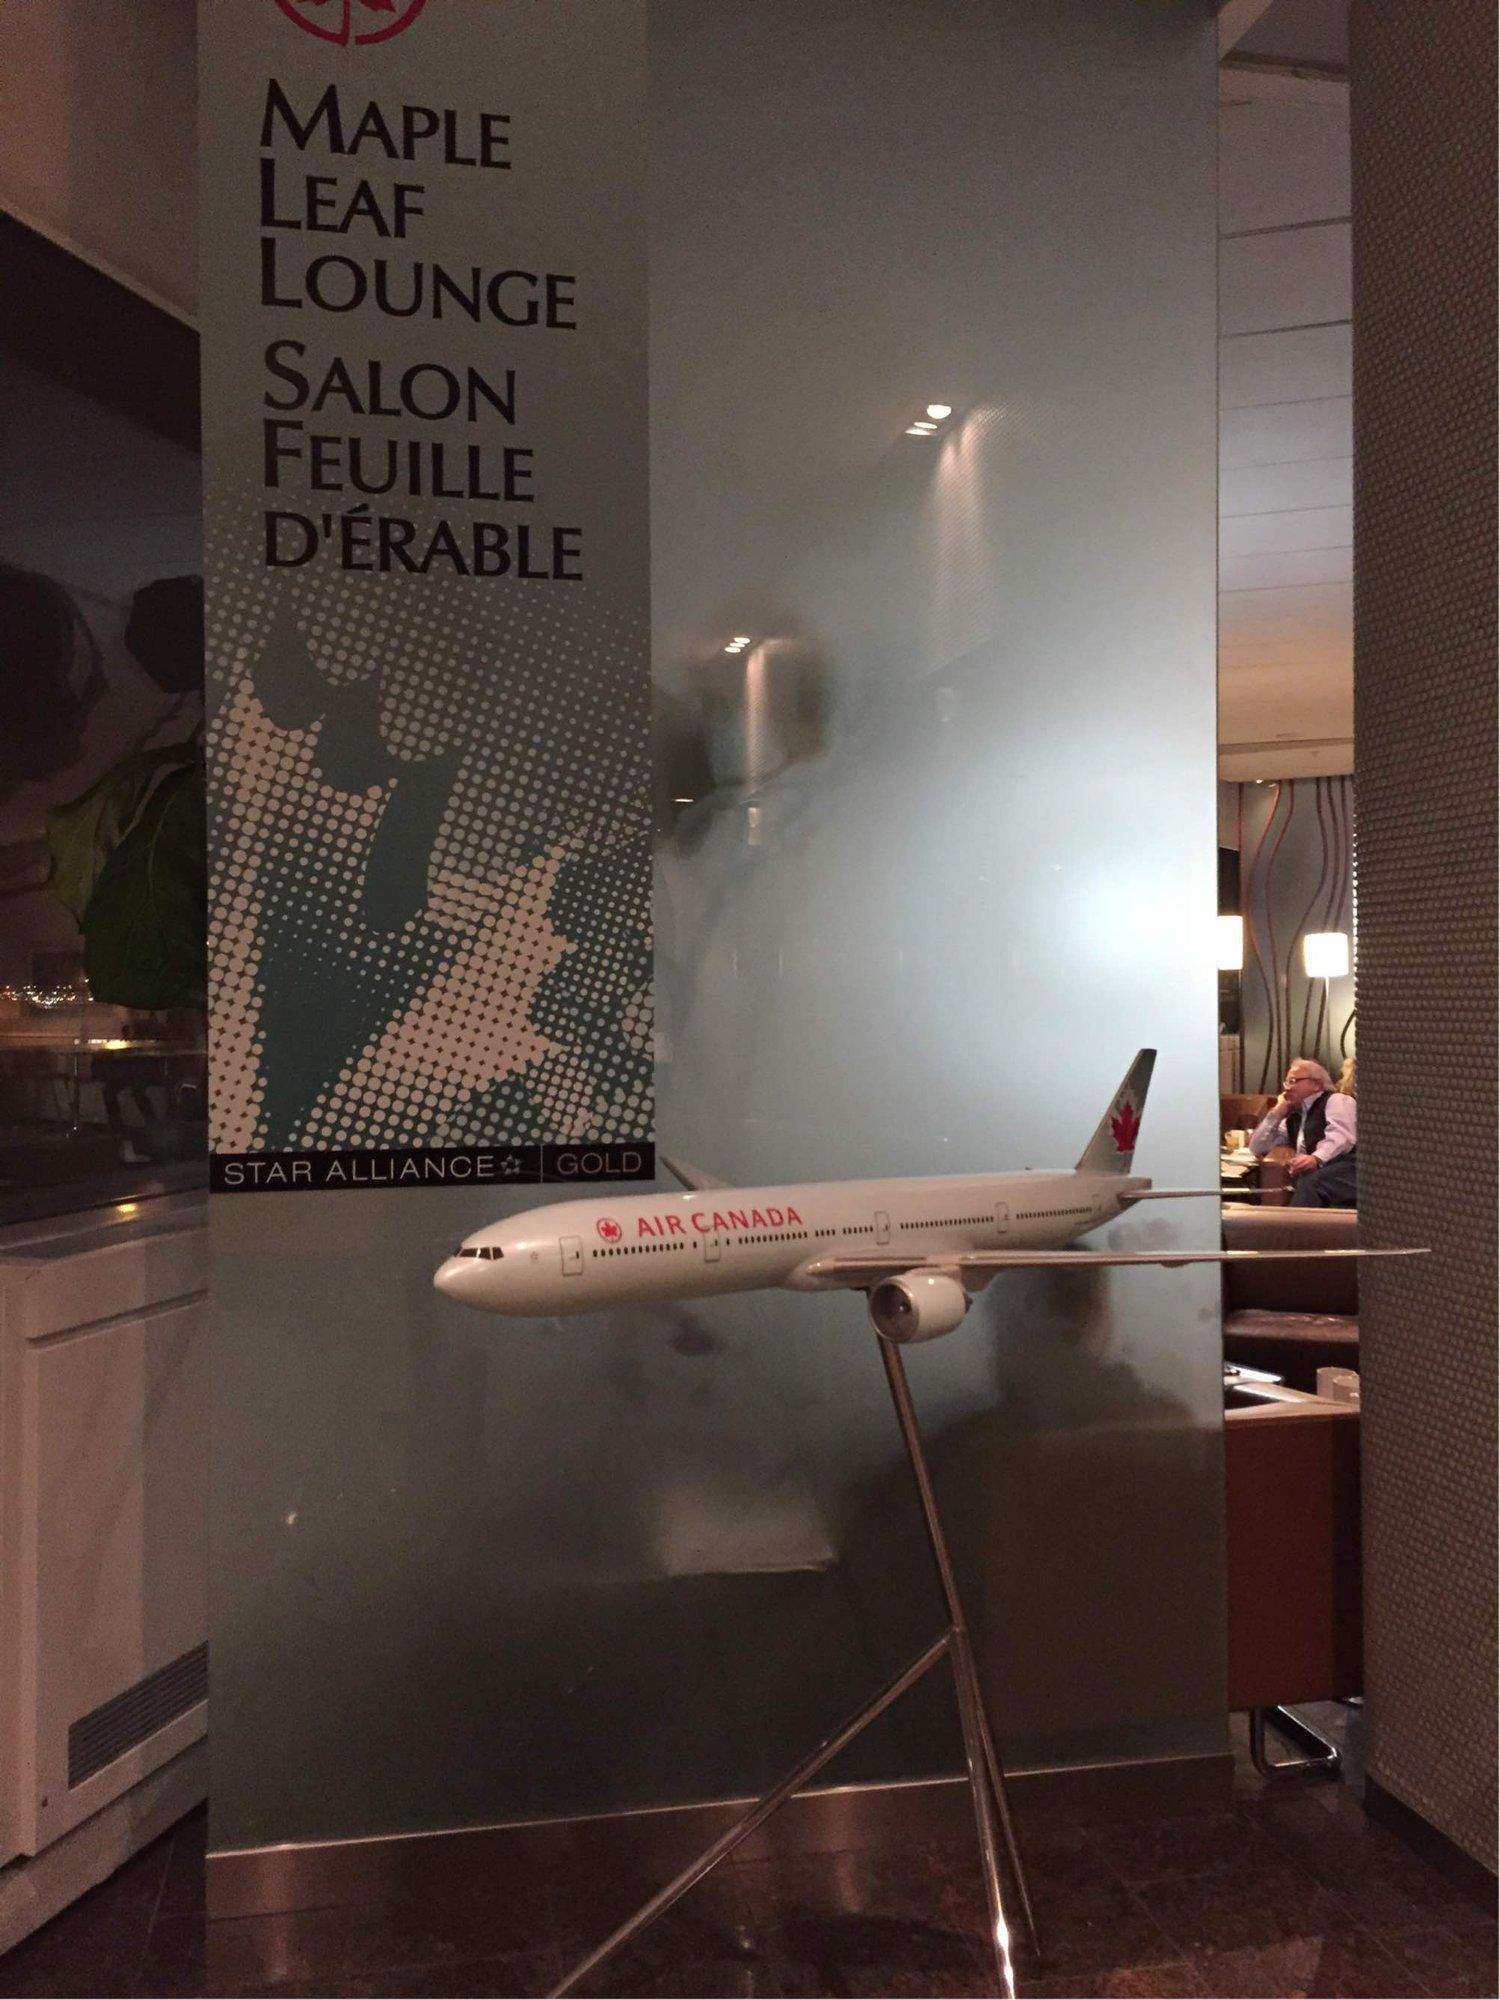 Air Canada Maple Leaf Lounge image 13 of 30